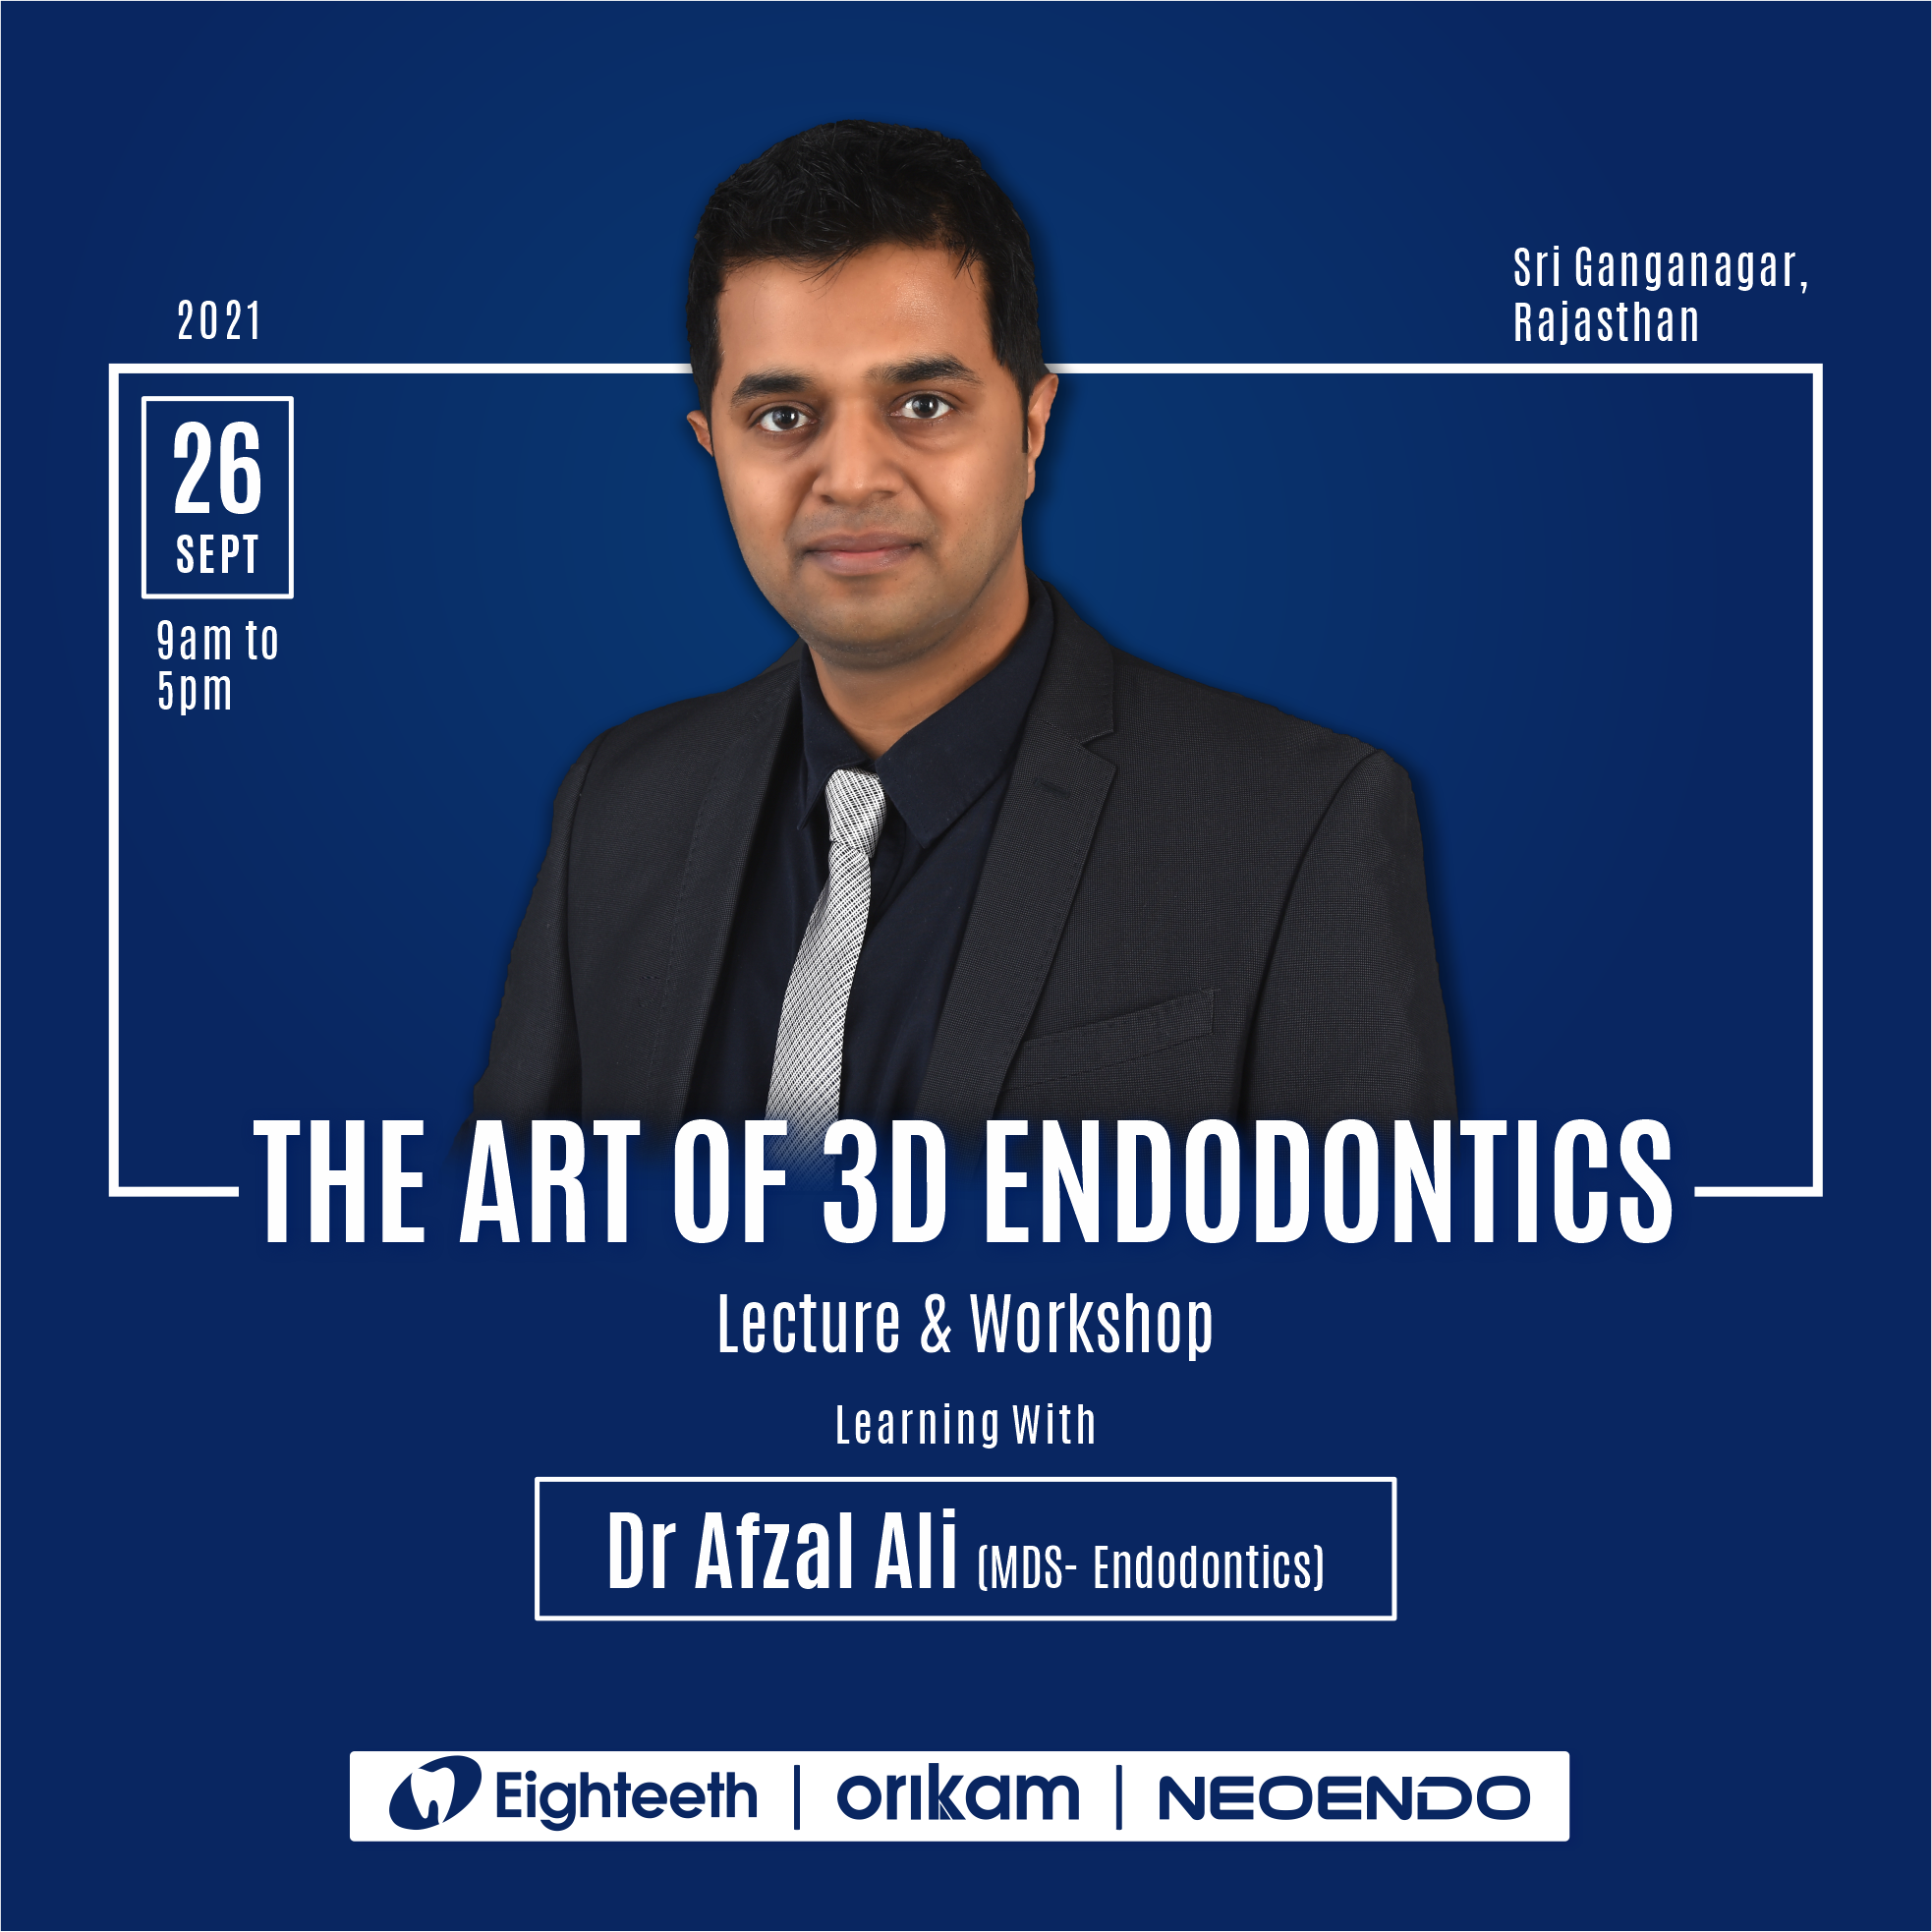 The art of 3D Endodontics (Lecture and Workshop) with Dr. Afzal Ali